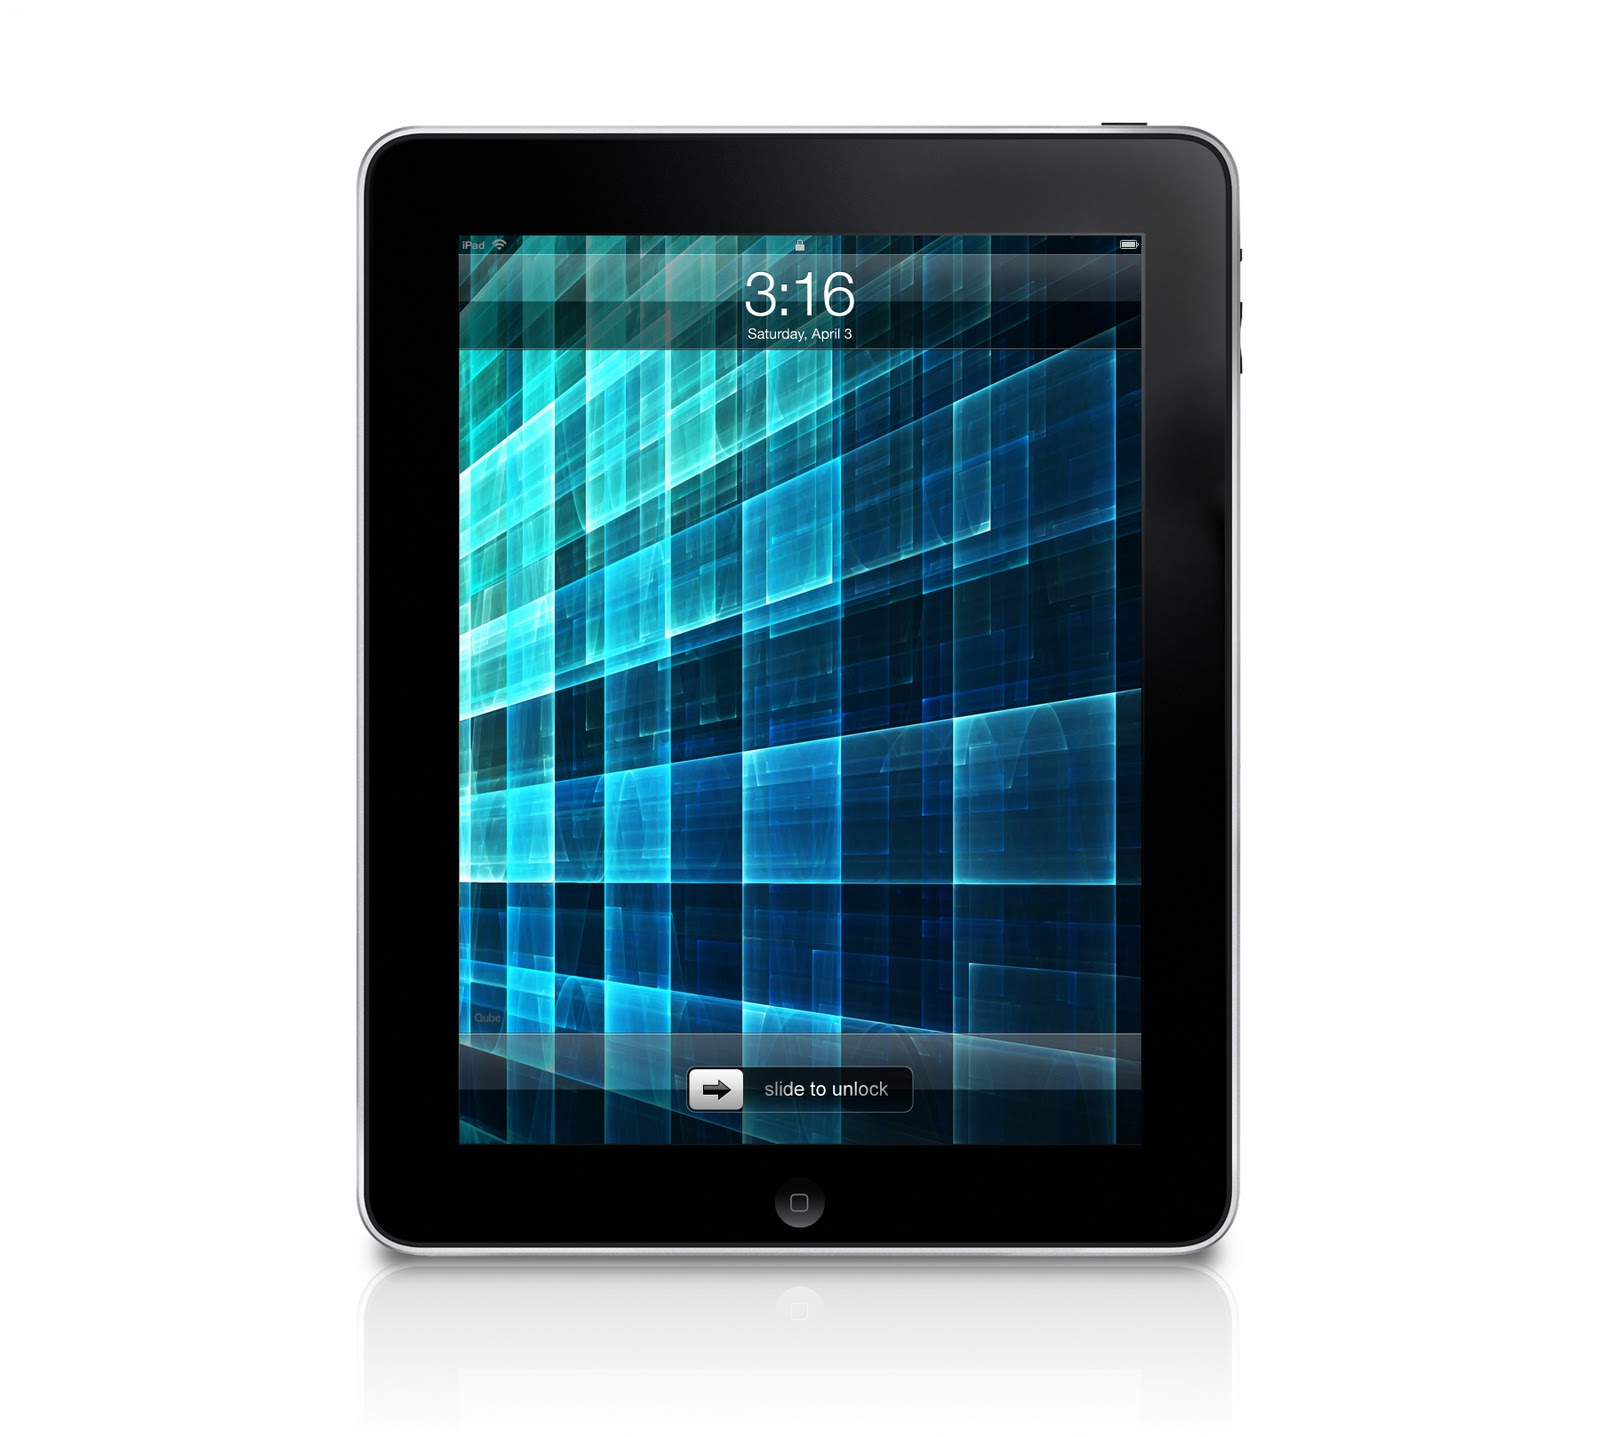 you can check out our wallpapers here qube ipad iphone wallpapers